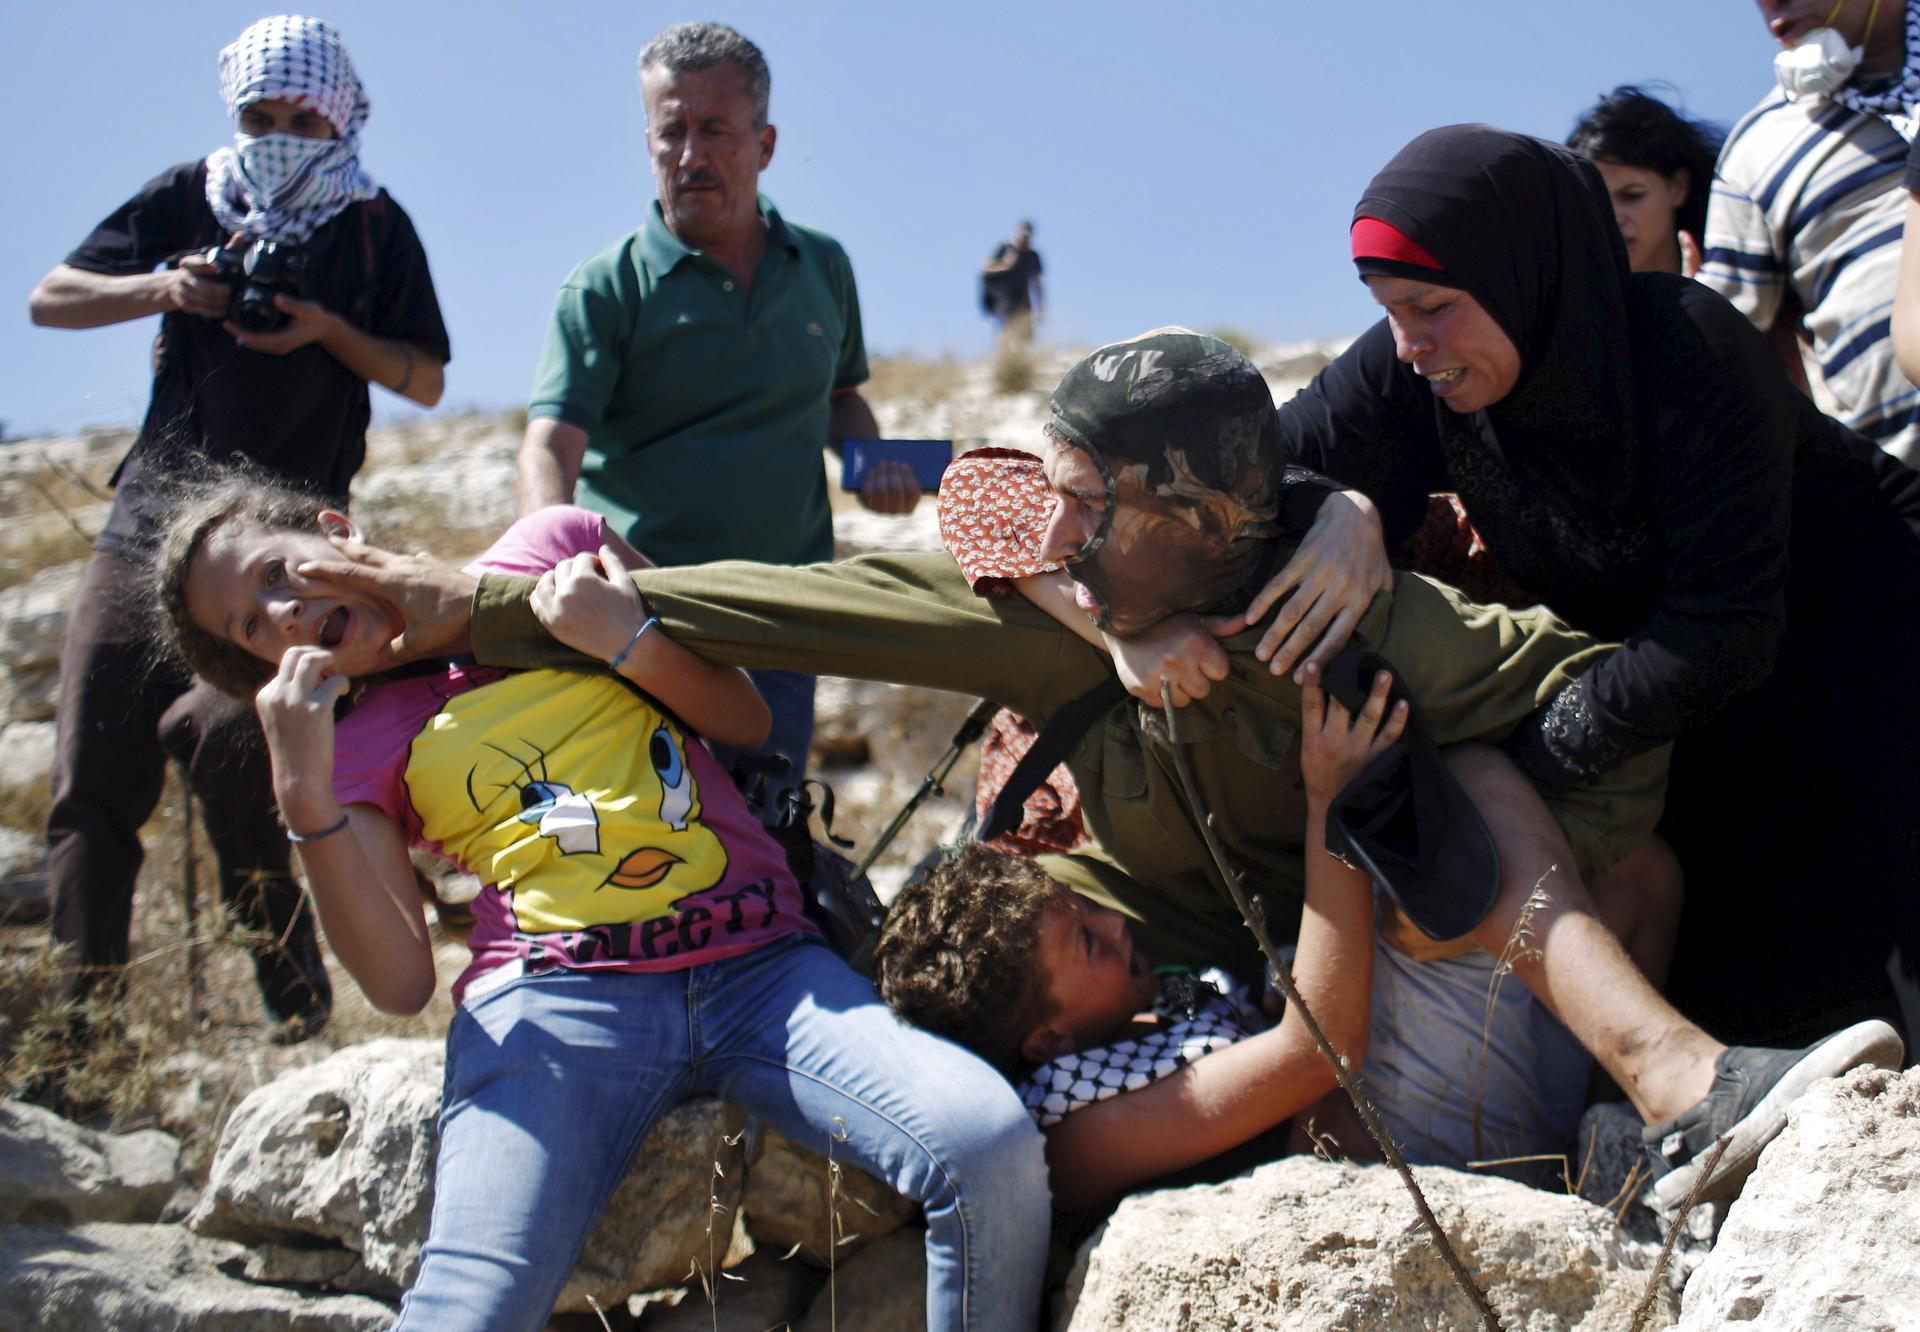 Palestinians scuffle with an Israeli soldier